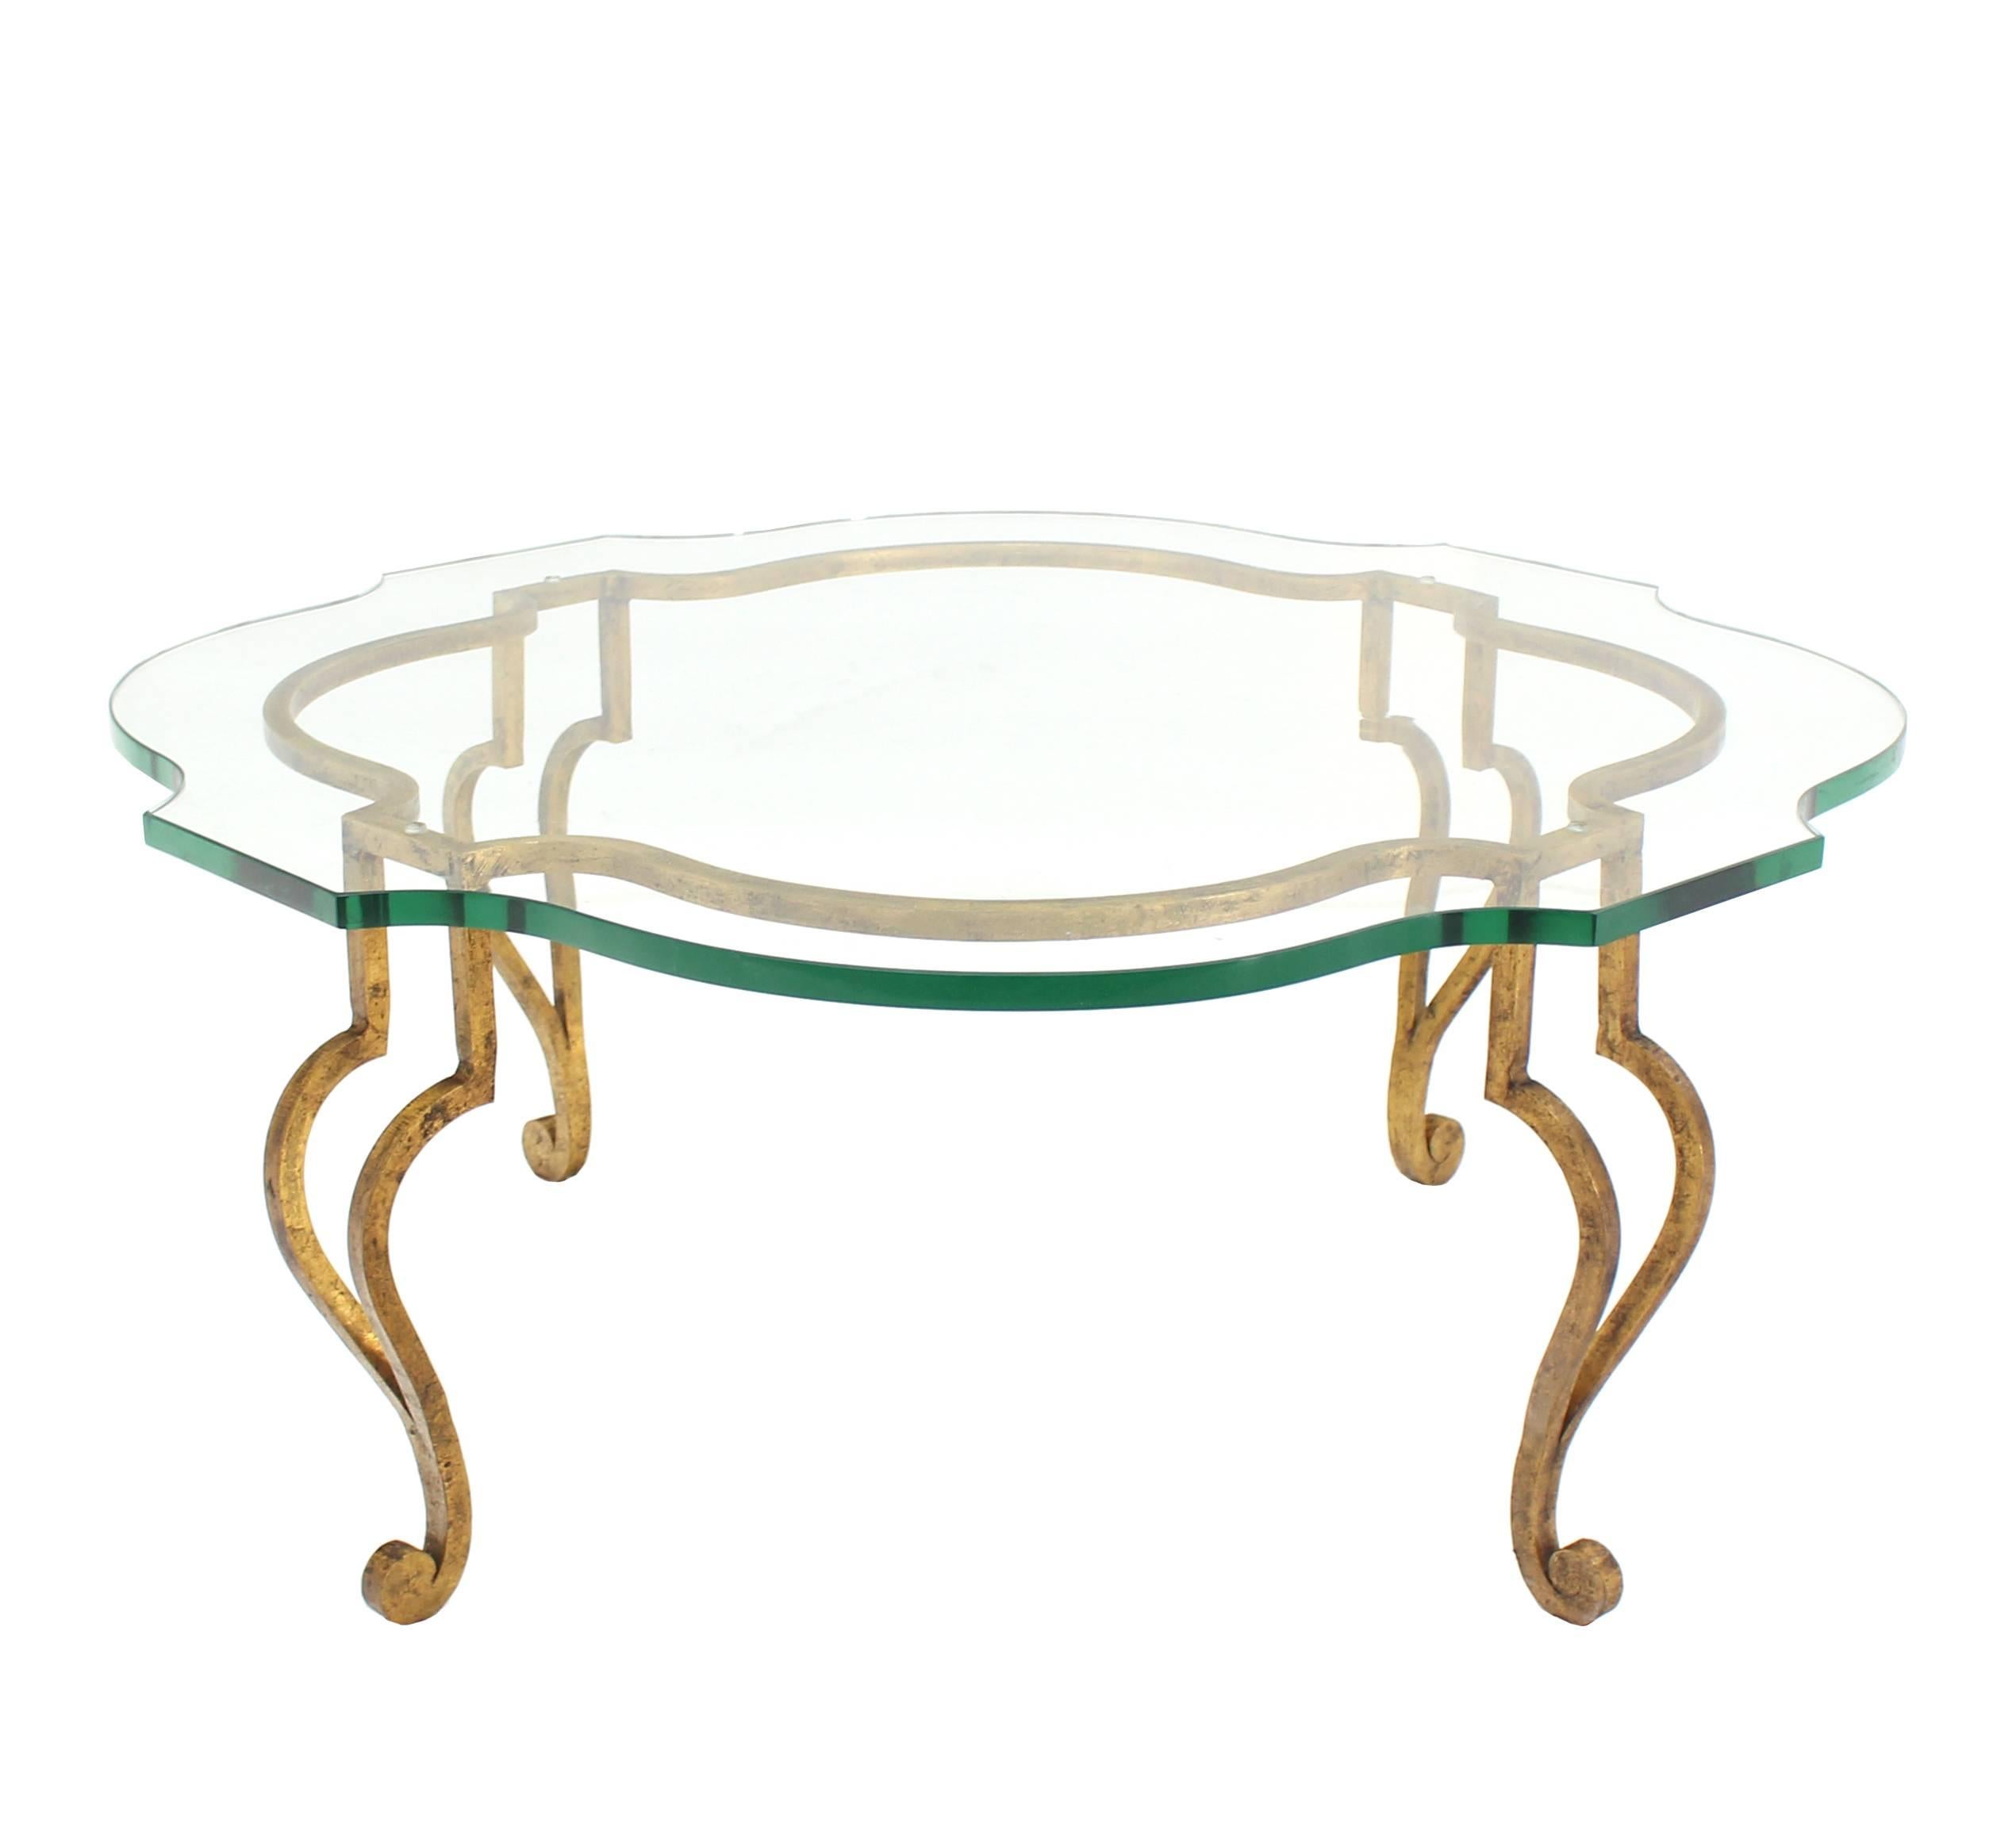 Gilt Wrought Iron Thick Figural Glass Top Round Coffee Table Hollywood Regency In Excellent Condition For Sale In Rockaway, NJ